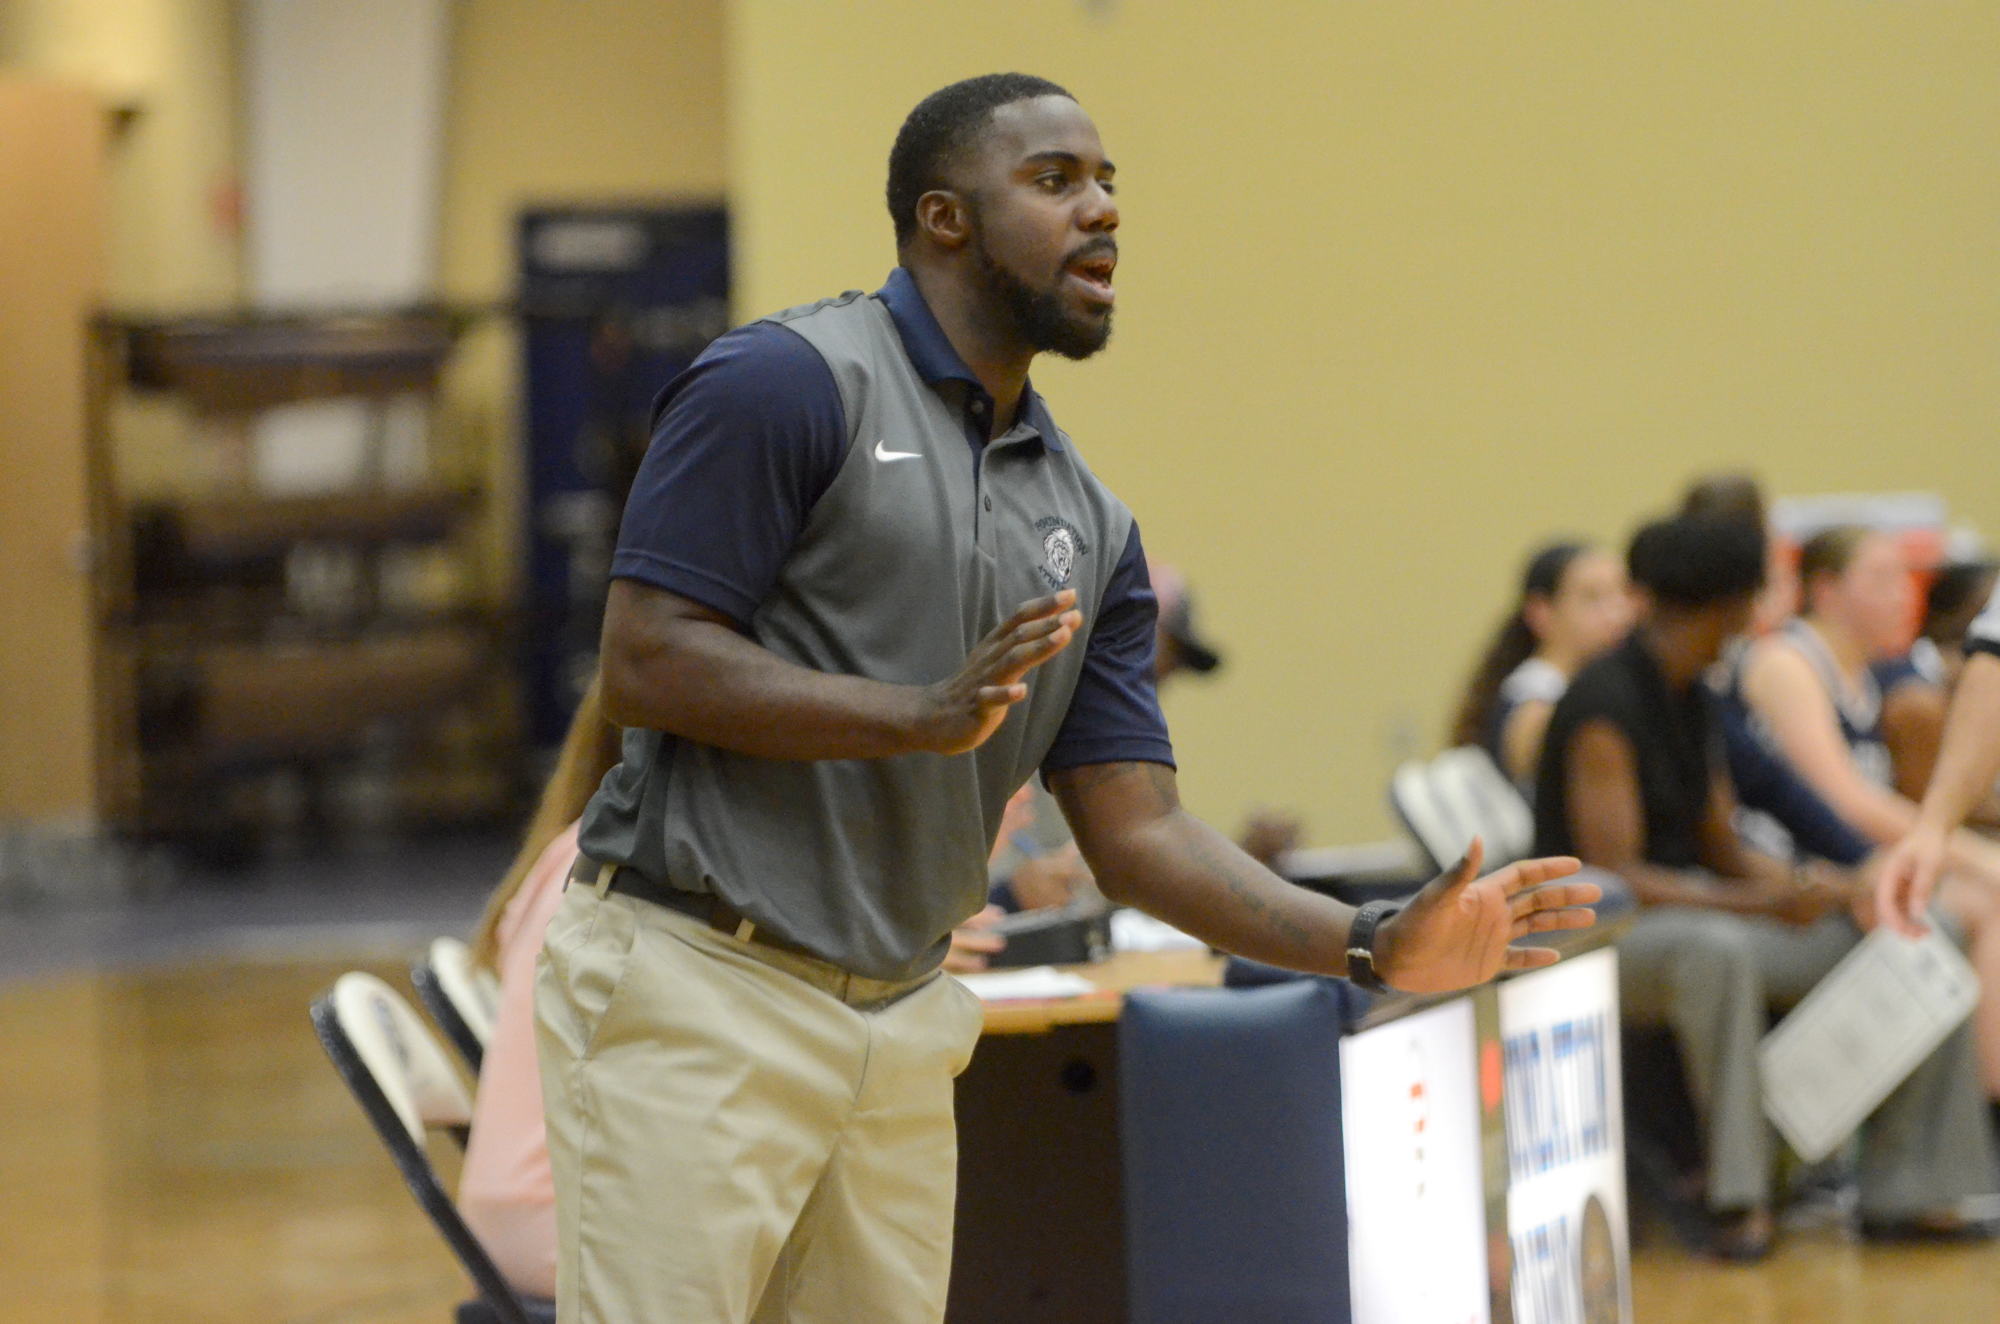 Foundation Academy's Dejon Everson is getting his first shot at being a head coach with the Lions' girls varsity program.